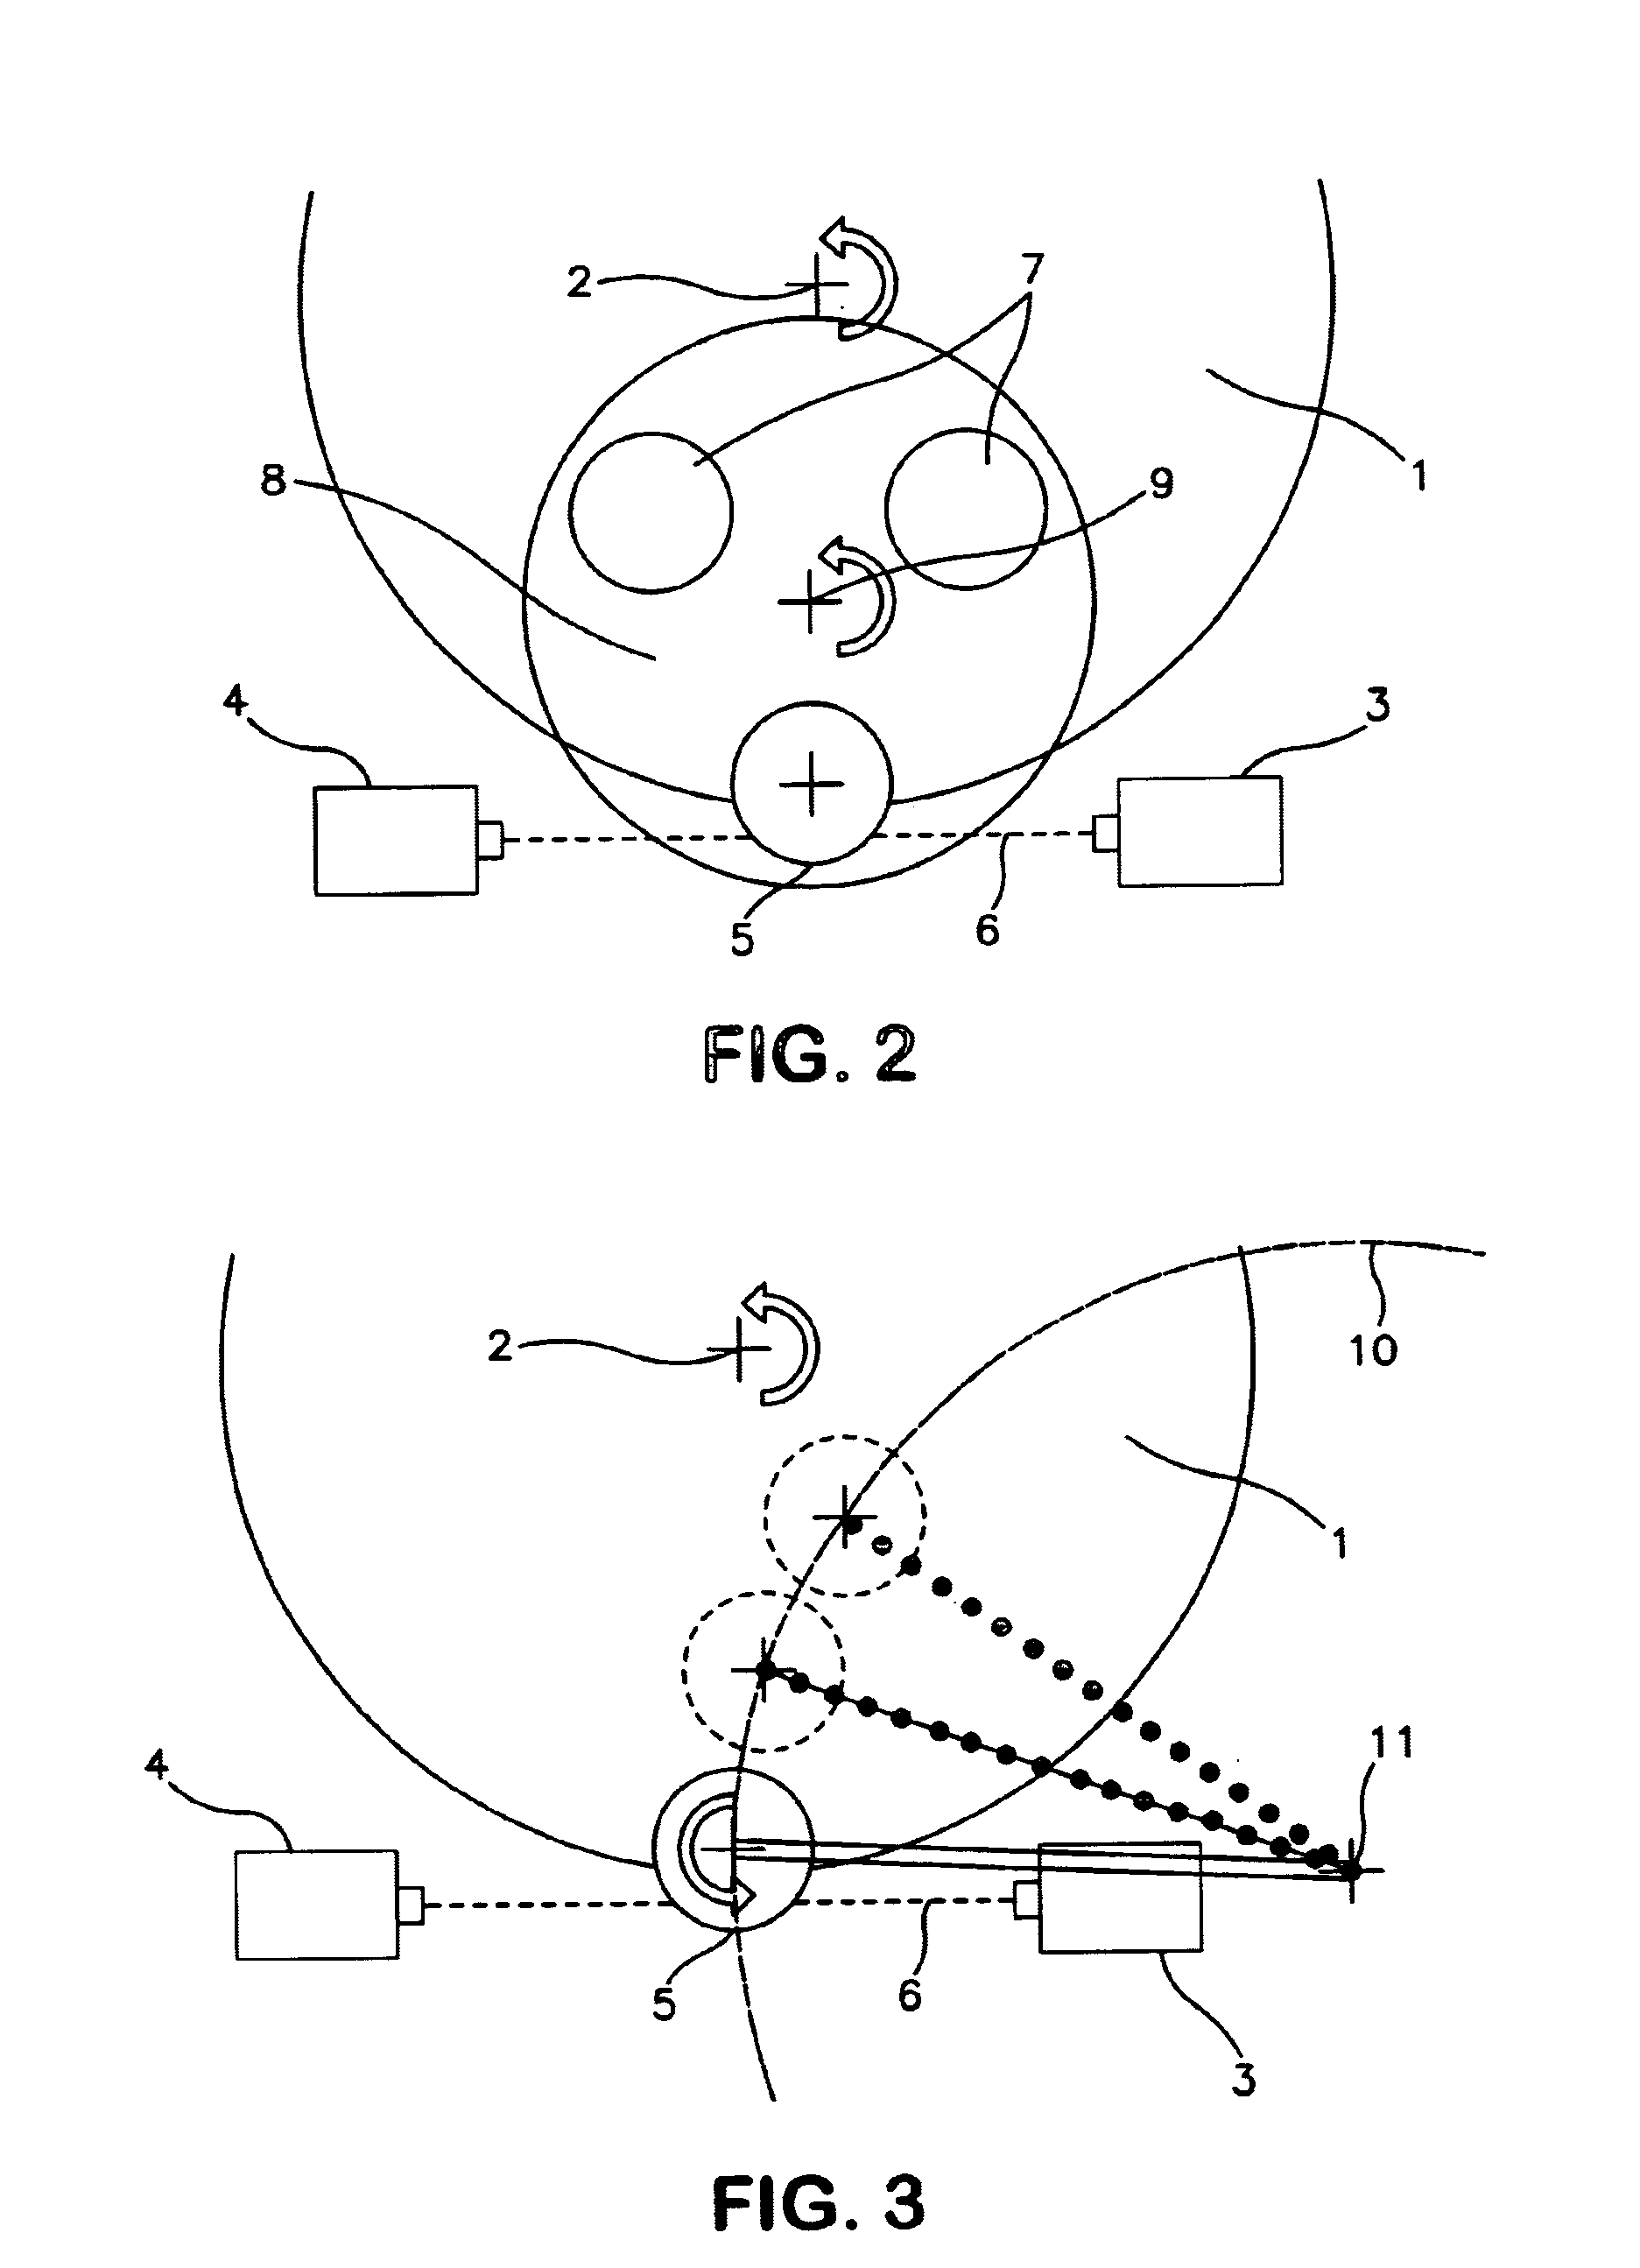 Method and apparatus for inline measurement of material removal during a polishing or grinding process